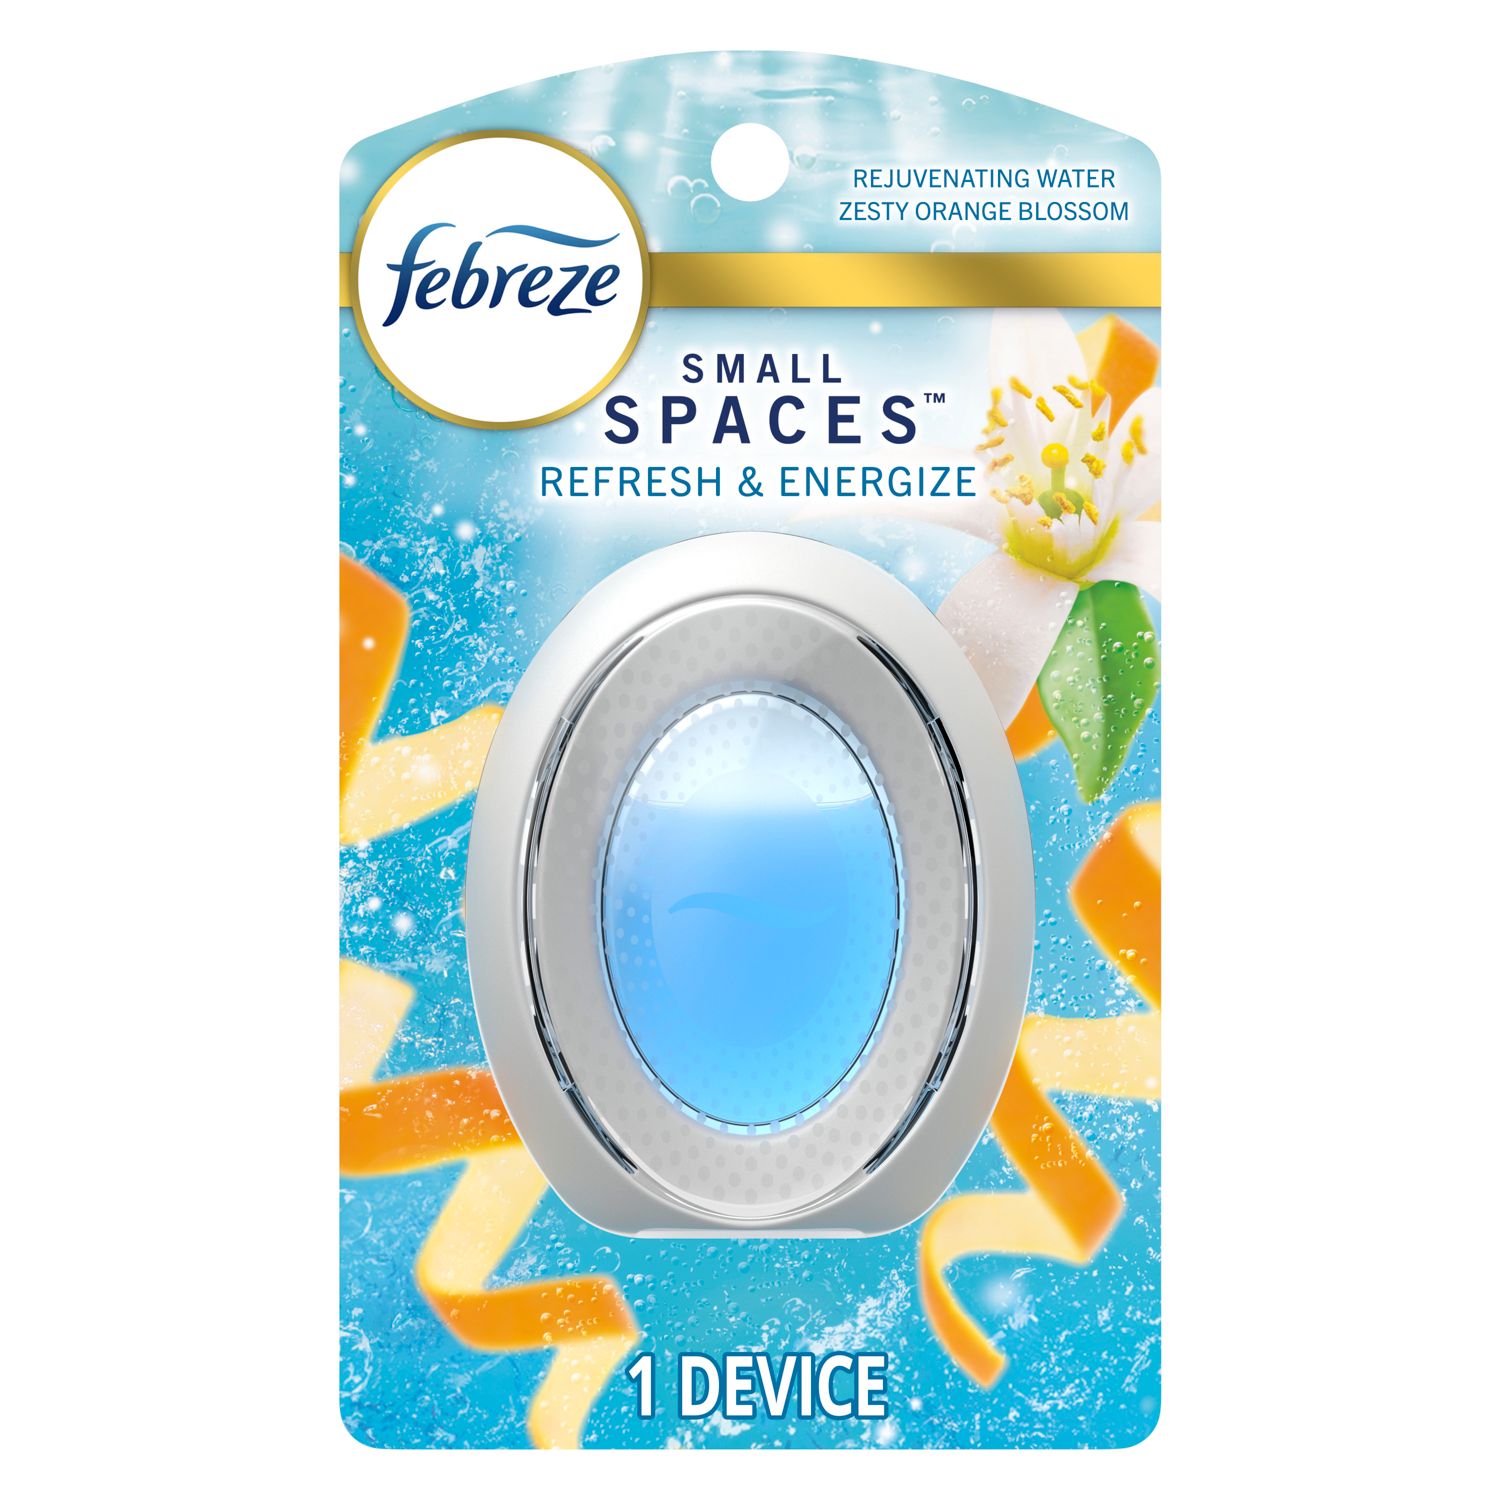 0.25-Oz Febreze Small Spaces Air Freshener (Various Scents) $1 + Free Store Pickup at Target